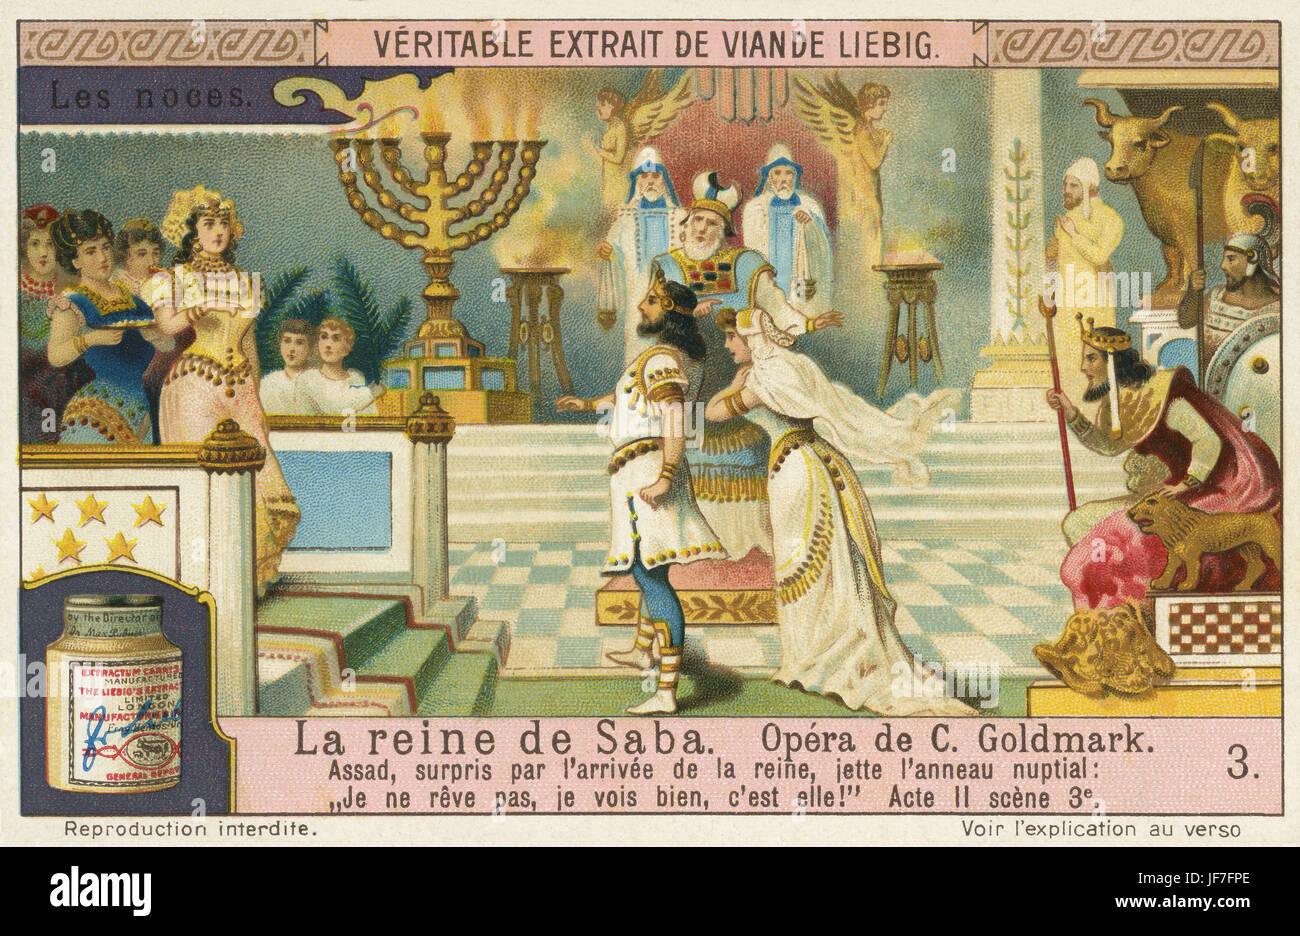 Die Königin von Saba / The Queen of Sheba, opera by Karl Goldmark (May 18, 1830 – January 2, 1915), Hungarian composer. Act 2 scene 3. The Queen of Sheba appears at the wedding of Assad and Sulamith. Liebig collectors' card 1914 Stock Photo